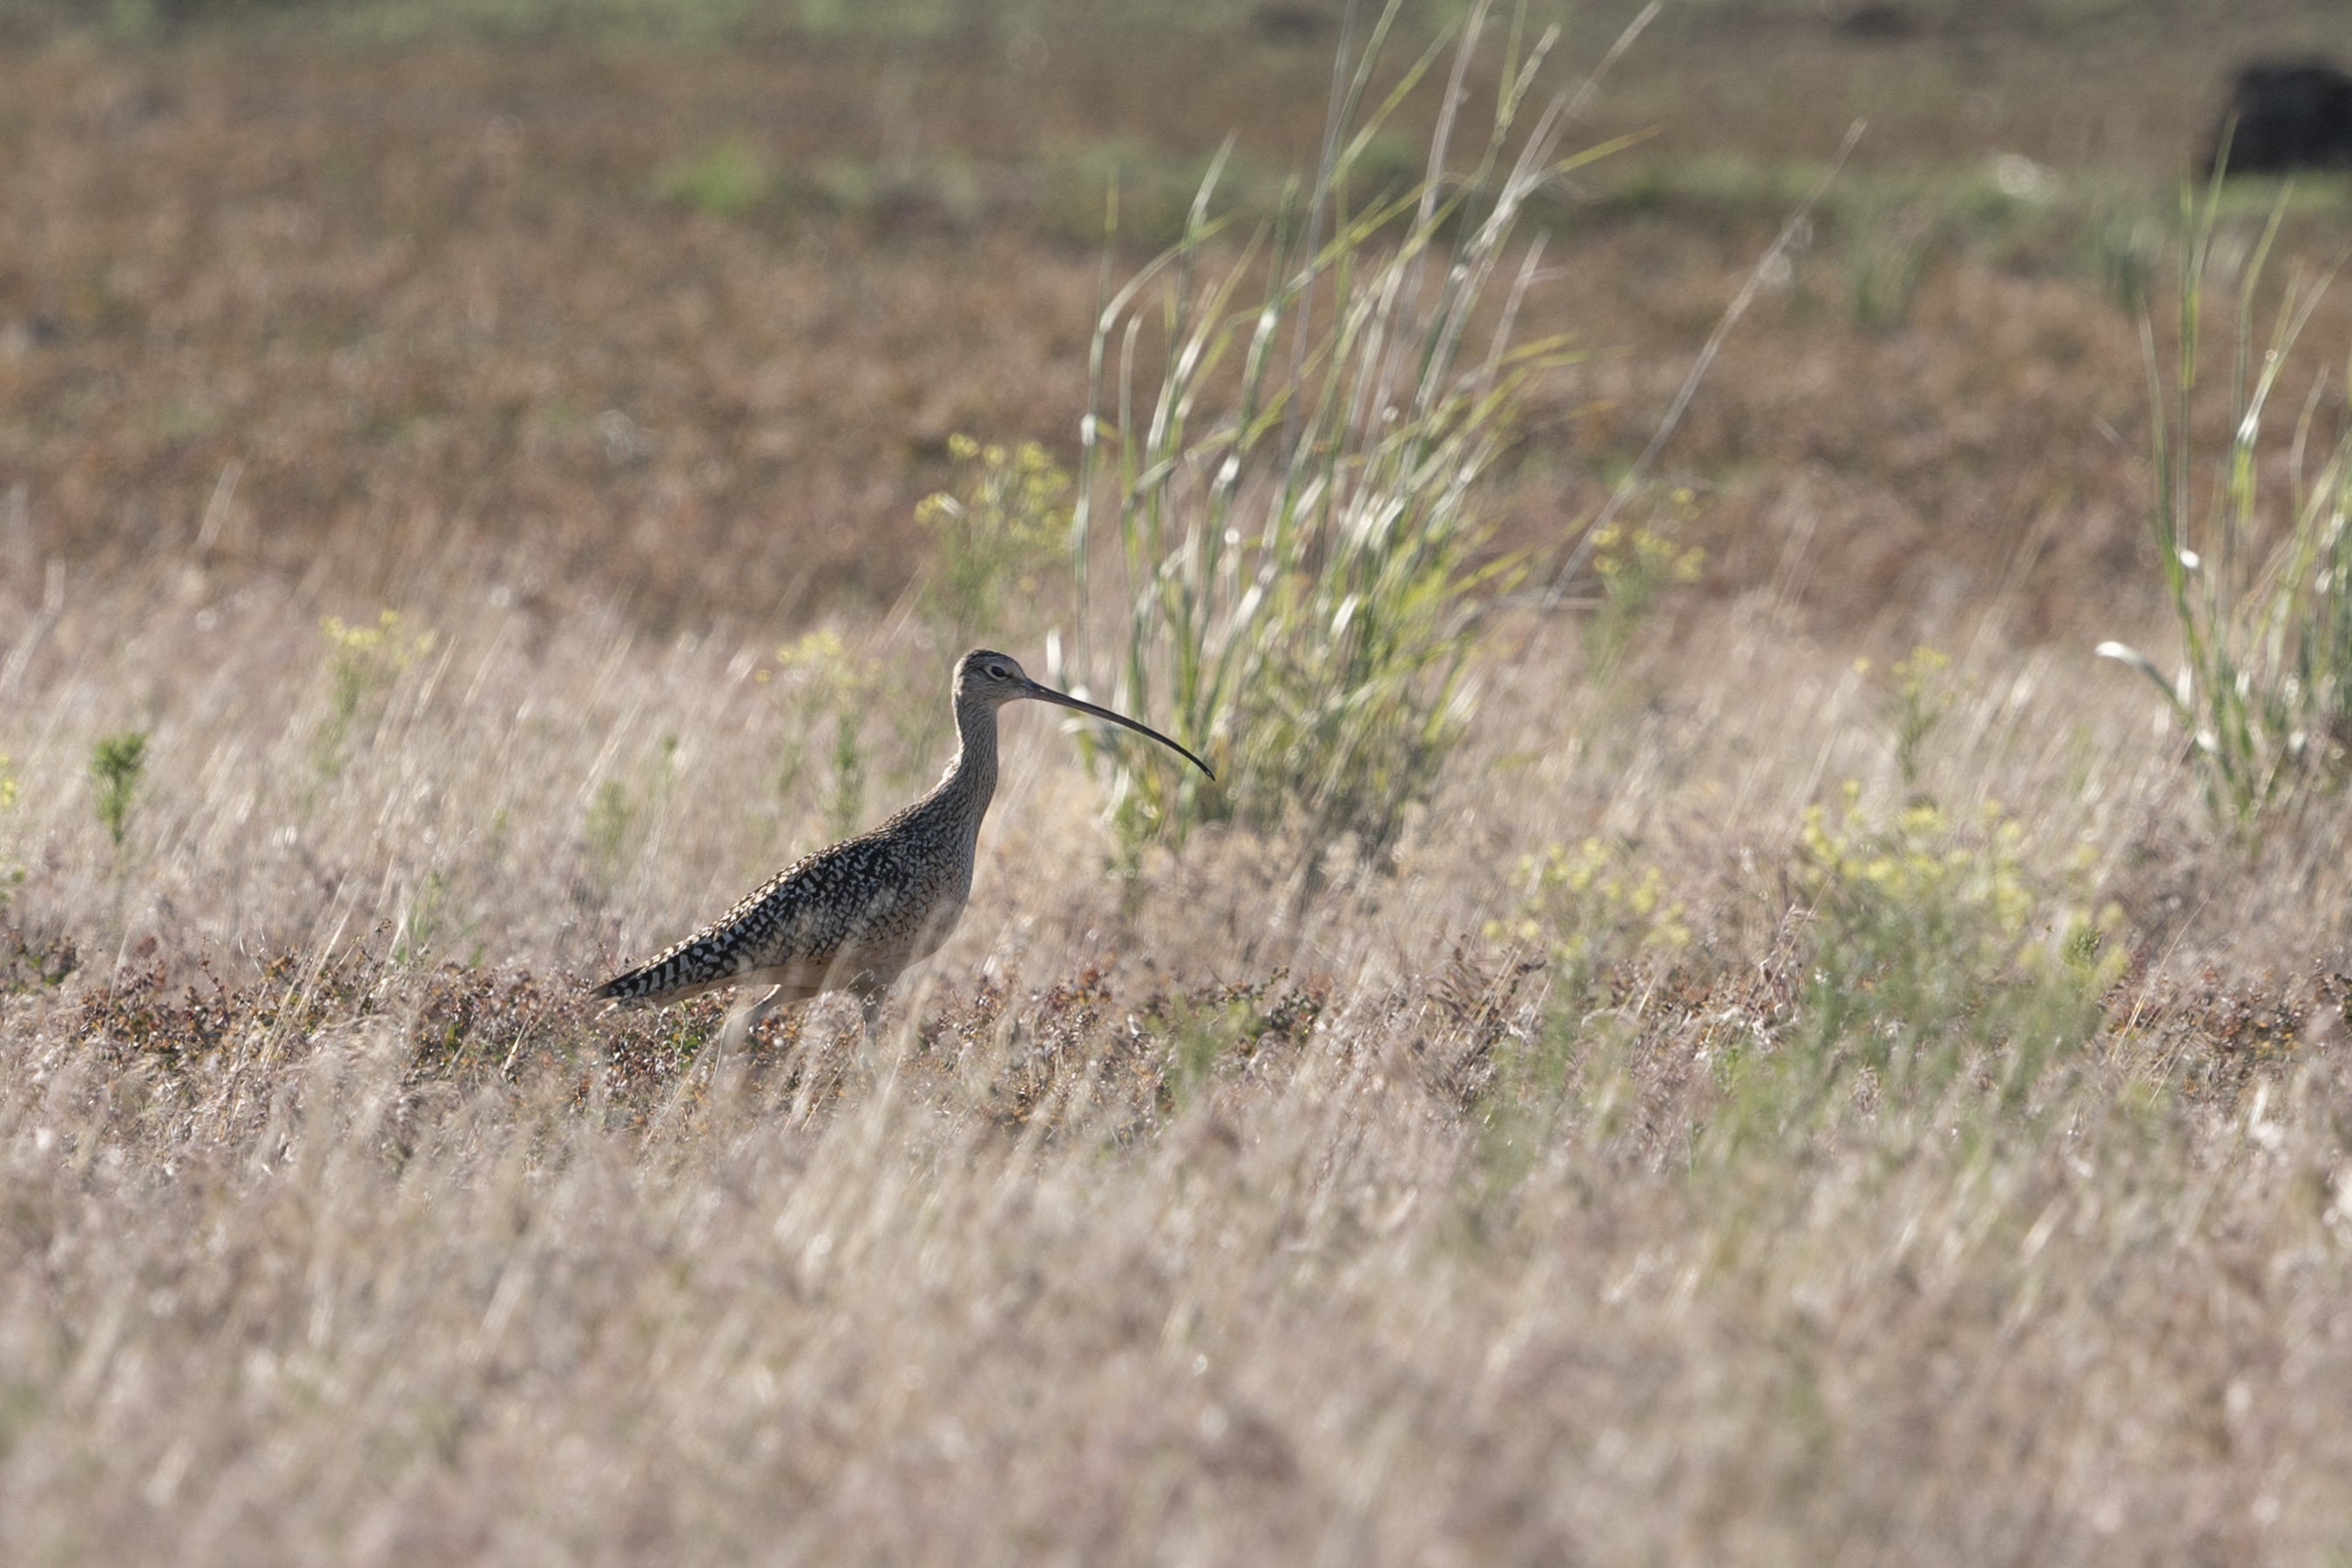 A rare long-billed curlew